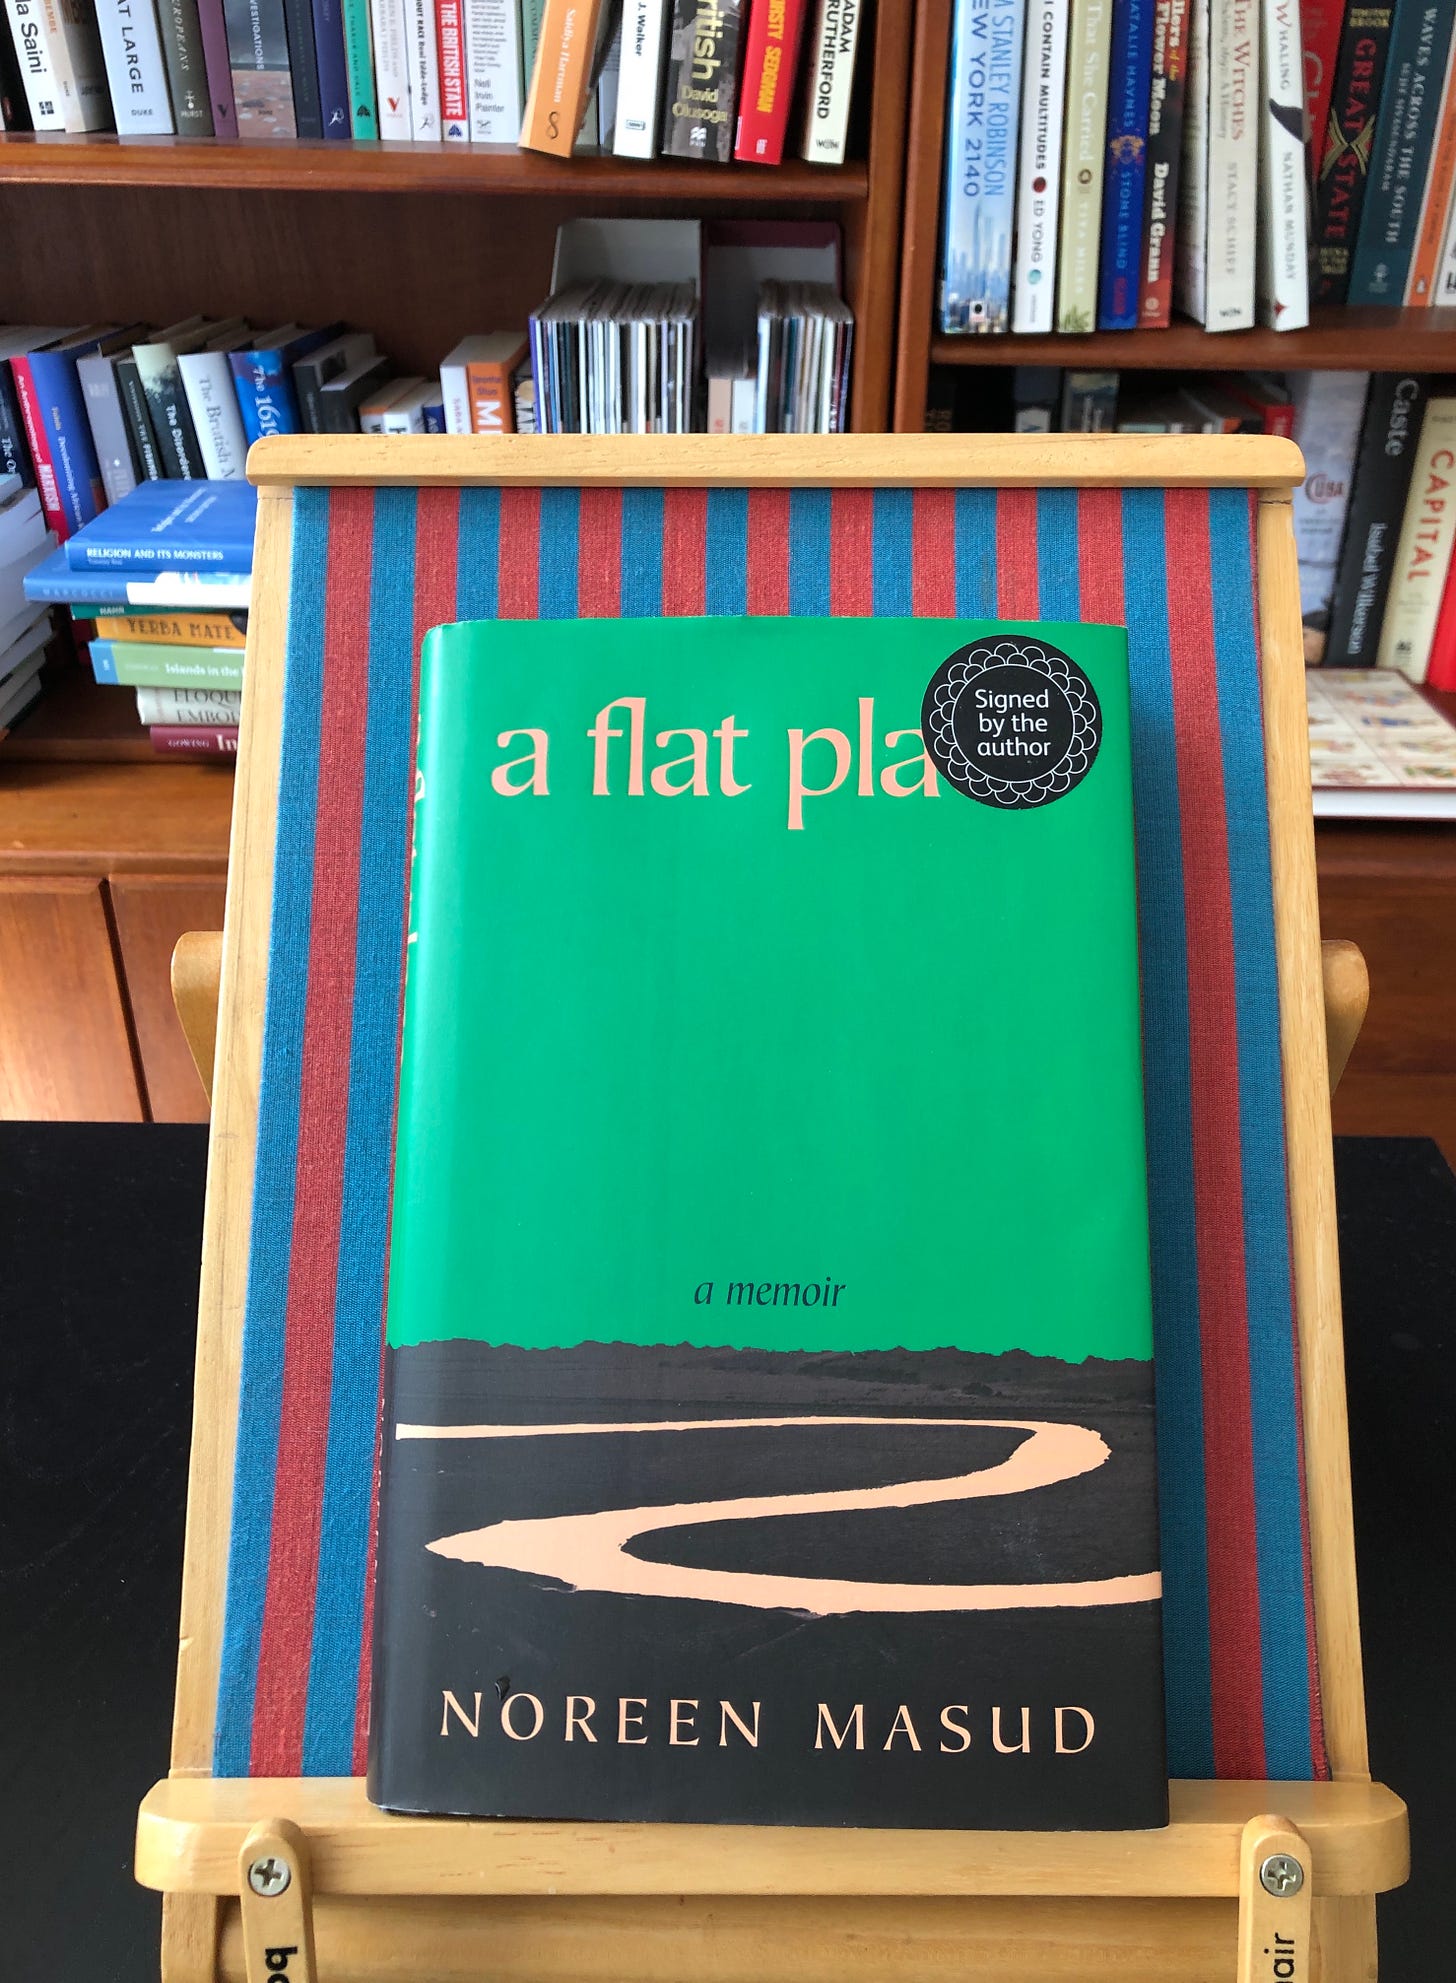 A book titled a flat place: a memoir, by Noreen Masud, sits on a stripy bookchair. A circular “signed by the author” obscures part of the title at the top right-hand corner. The cover is mostly blank, with a flat landscape along the bottom third, through which snakes an empty road. In the background is a wooden bookcase full of books.